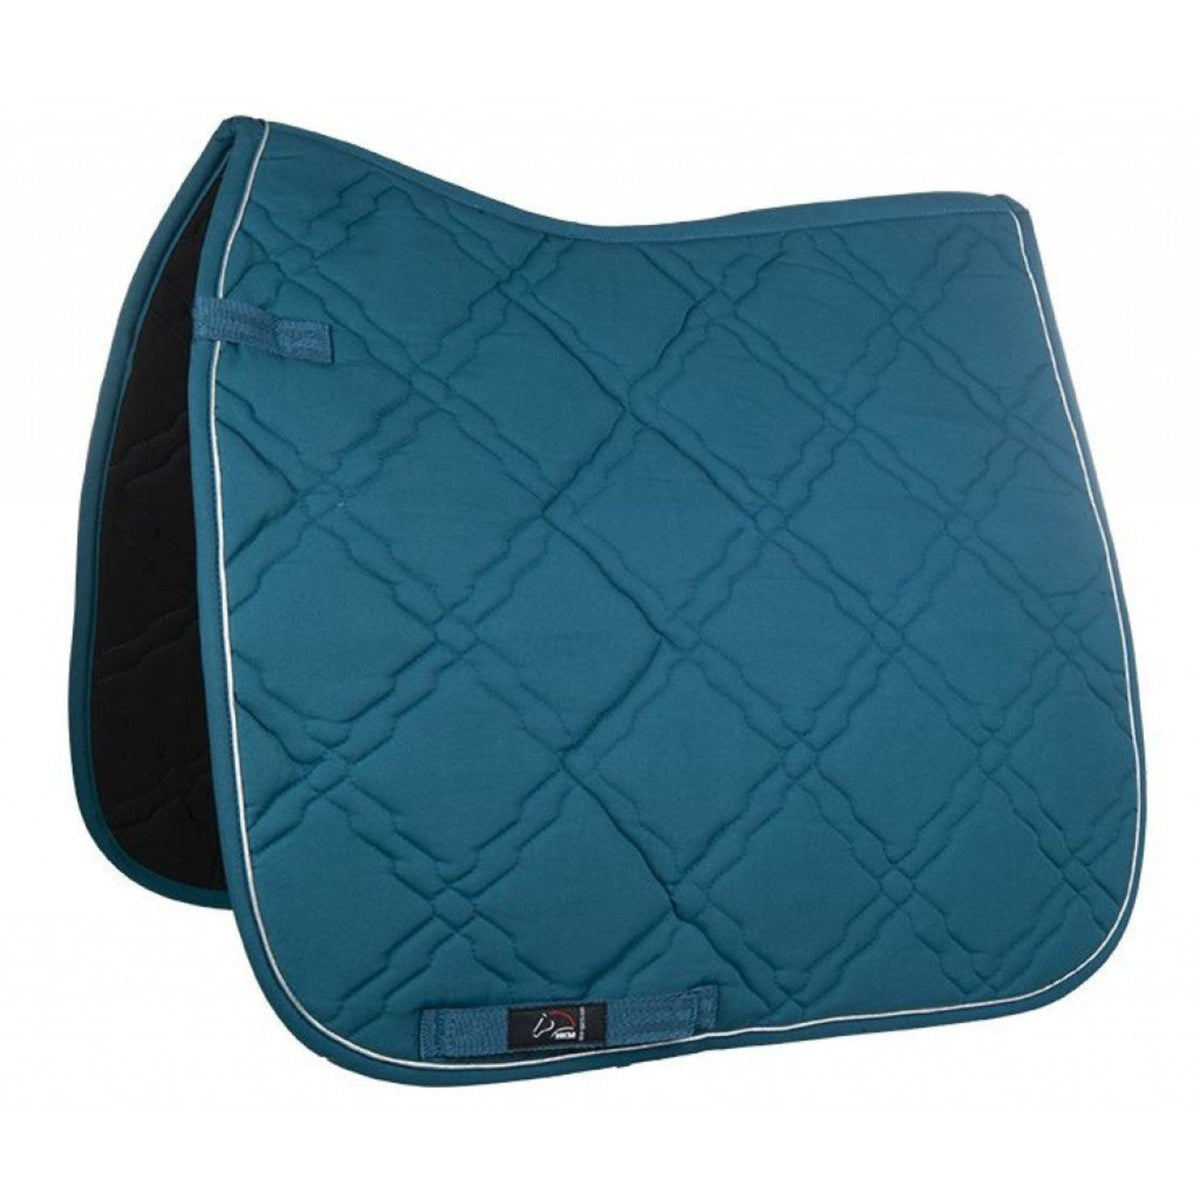 Teal saddle pad with white trim and velcro tab at top.